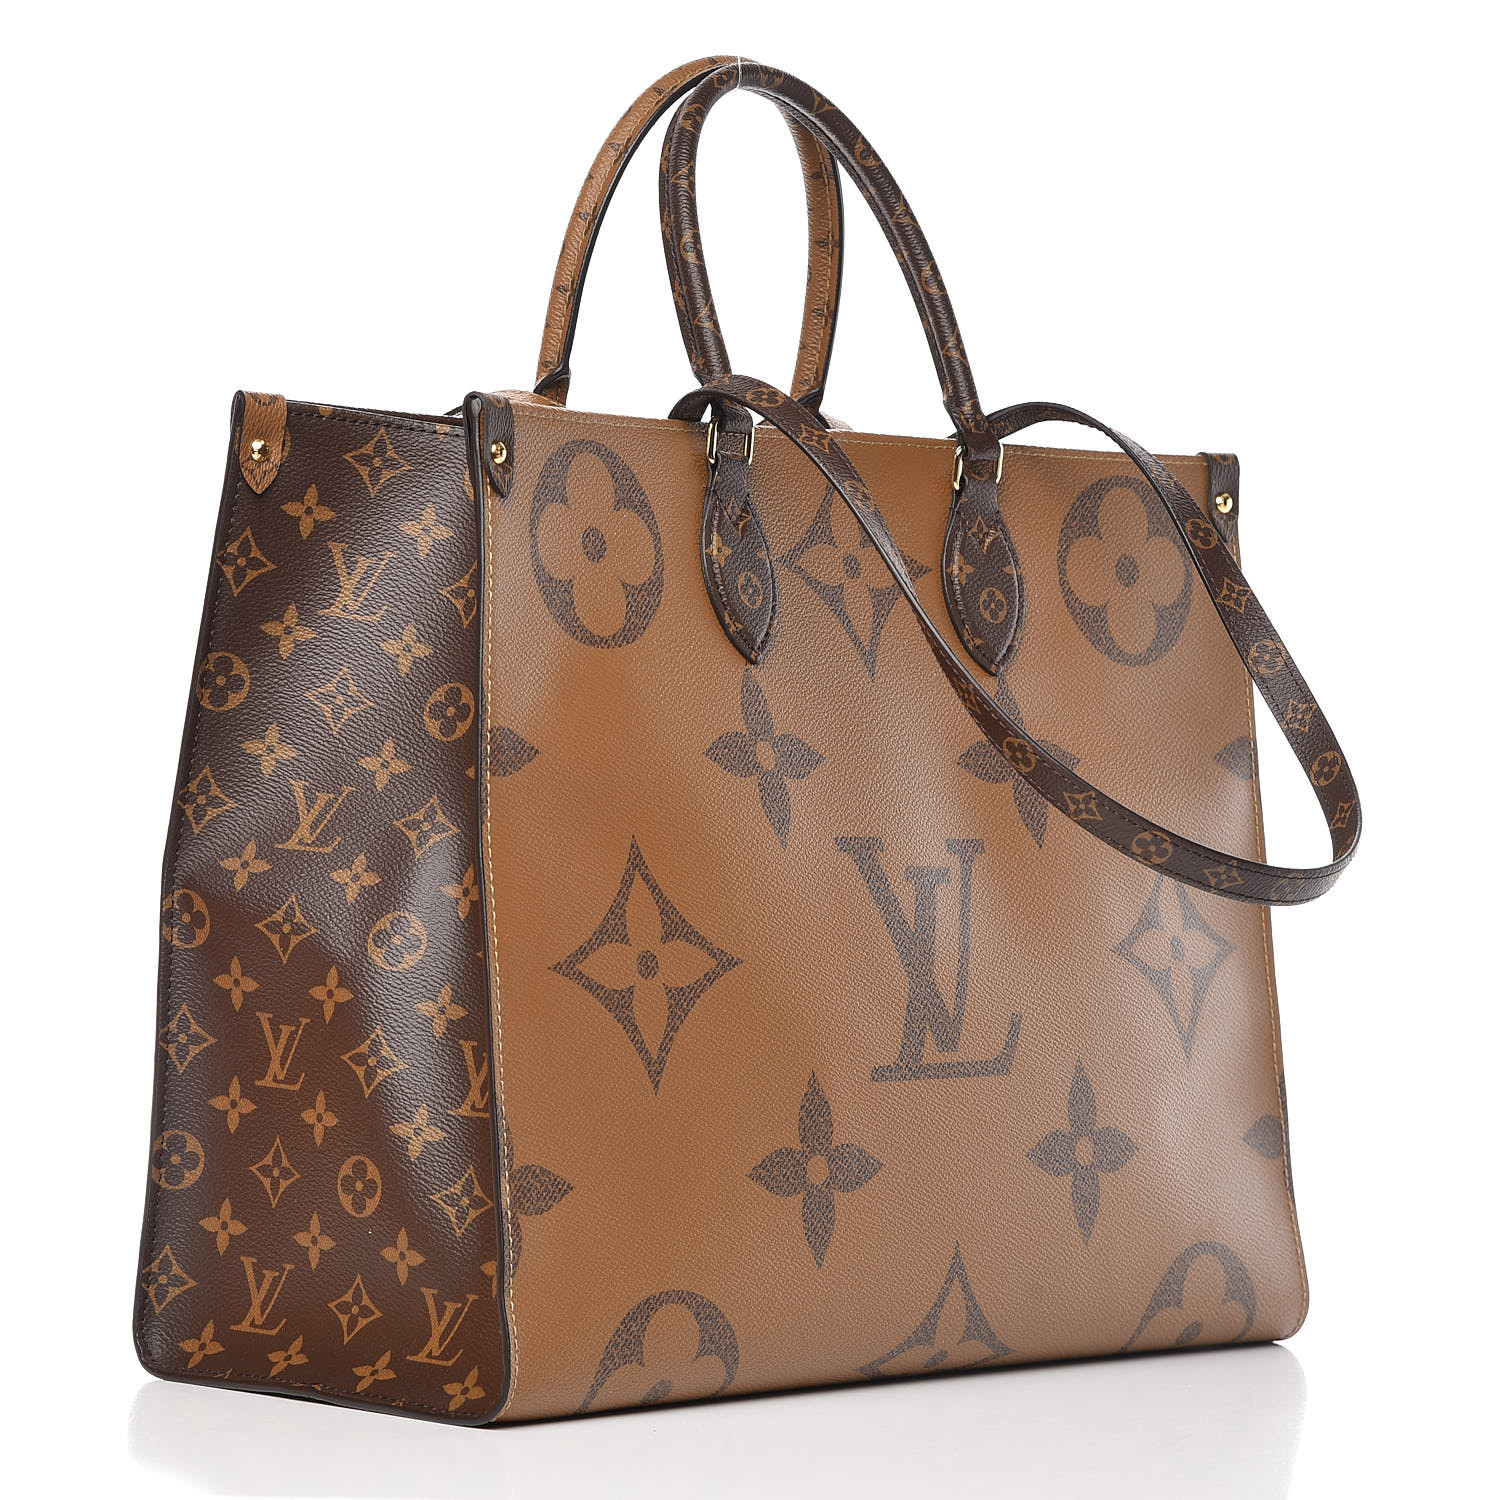 Louis Vuitton History  Natural Resource Department